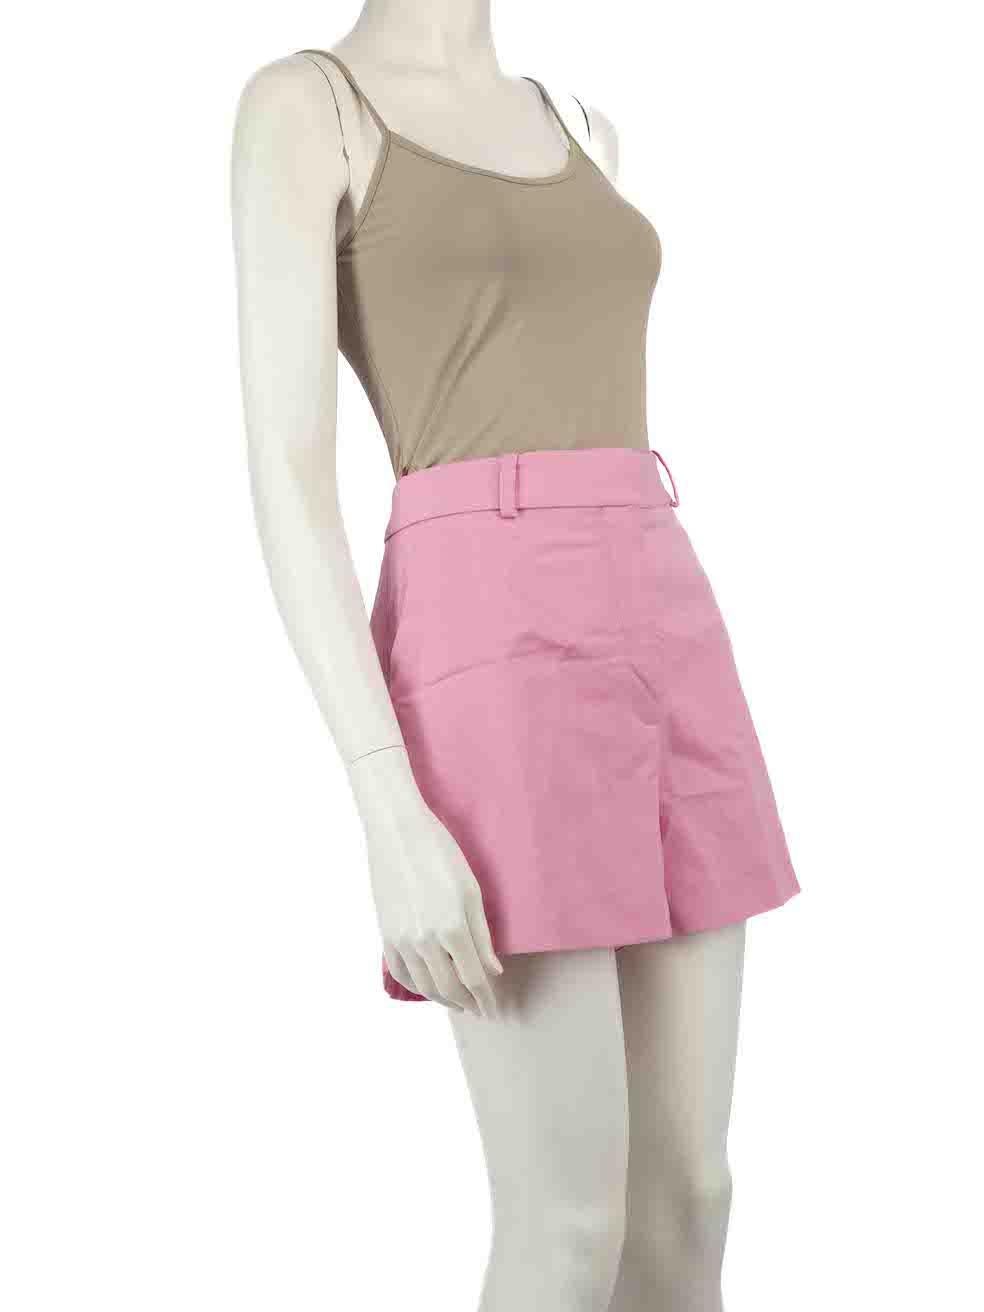 CONDITION is Very good. Hardly any visible wear to shorts is evident on this used Stella McCartney designer resale item.
 
 
 
 Details
 
 
 Pink
 
 Wool
 
 Shorts
 
 2x Side pockets
 
 Fly zip, hook and button fastening
 
 
 
 
 
 Made in Hungary
